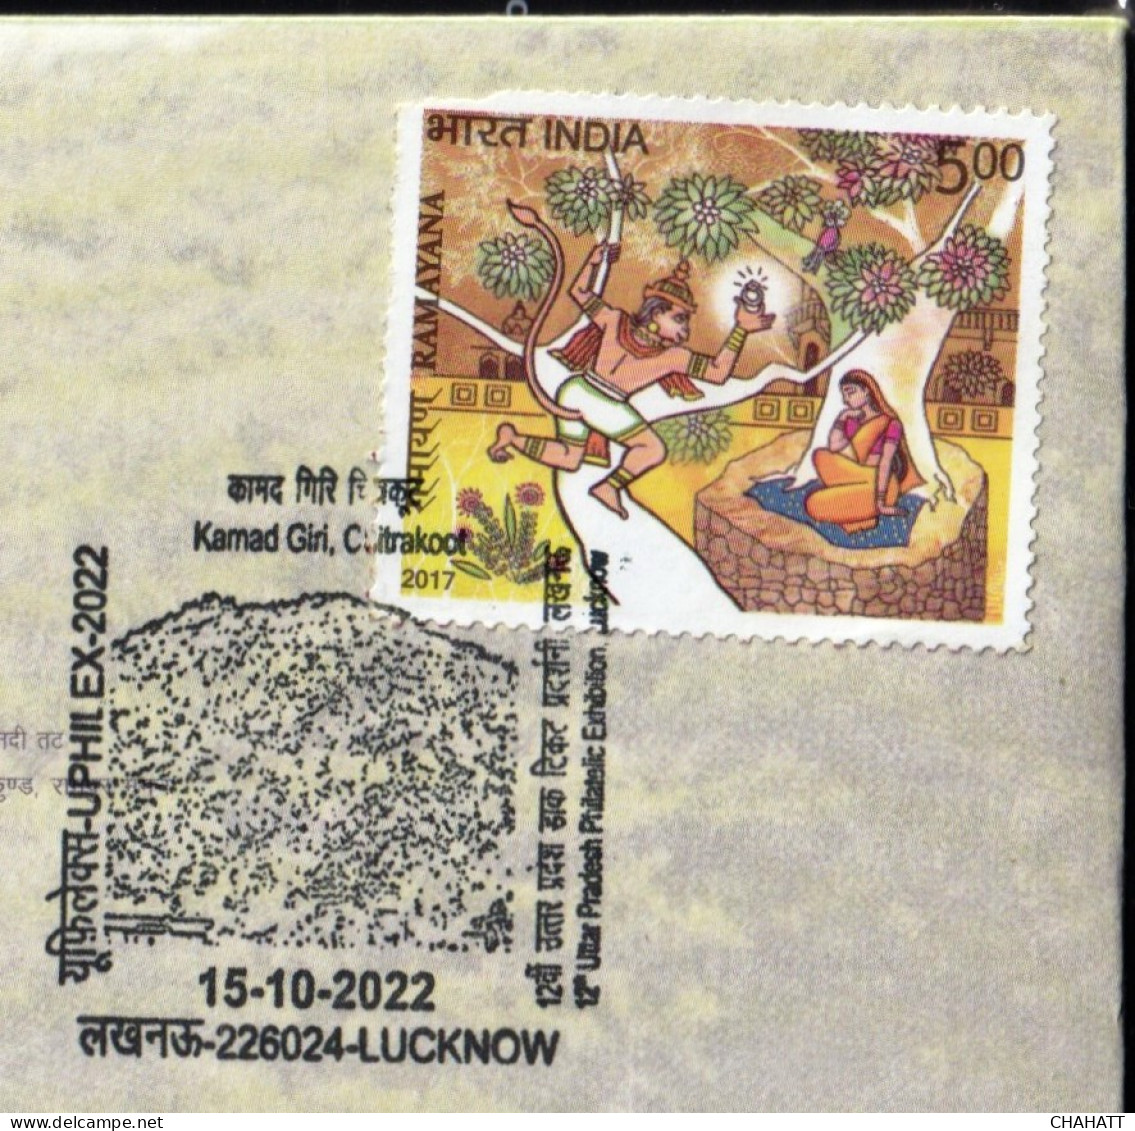 HINDUISM - RAMAYAN- KAMAD GIRI, FOREST HILLS OF CHITRAKOOT-PICTORIAL CANCELLATION - SPECIAL COVER - INDIA -2022- BX4-23 - Hindouisme